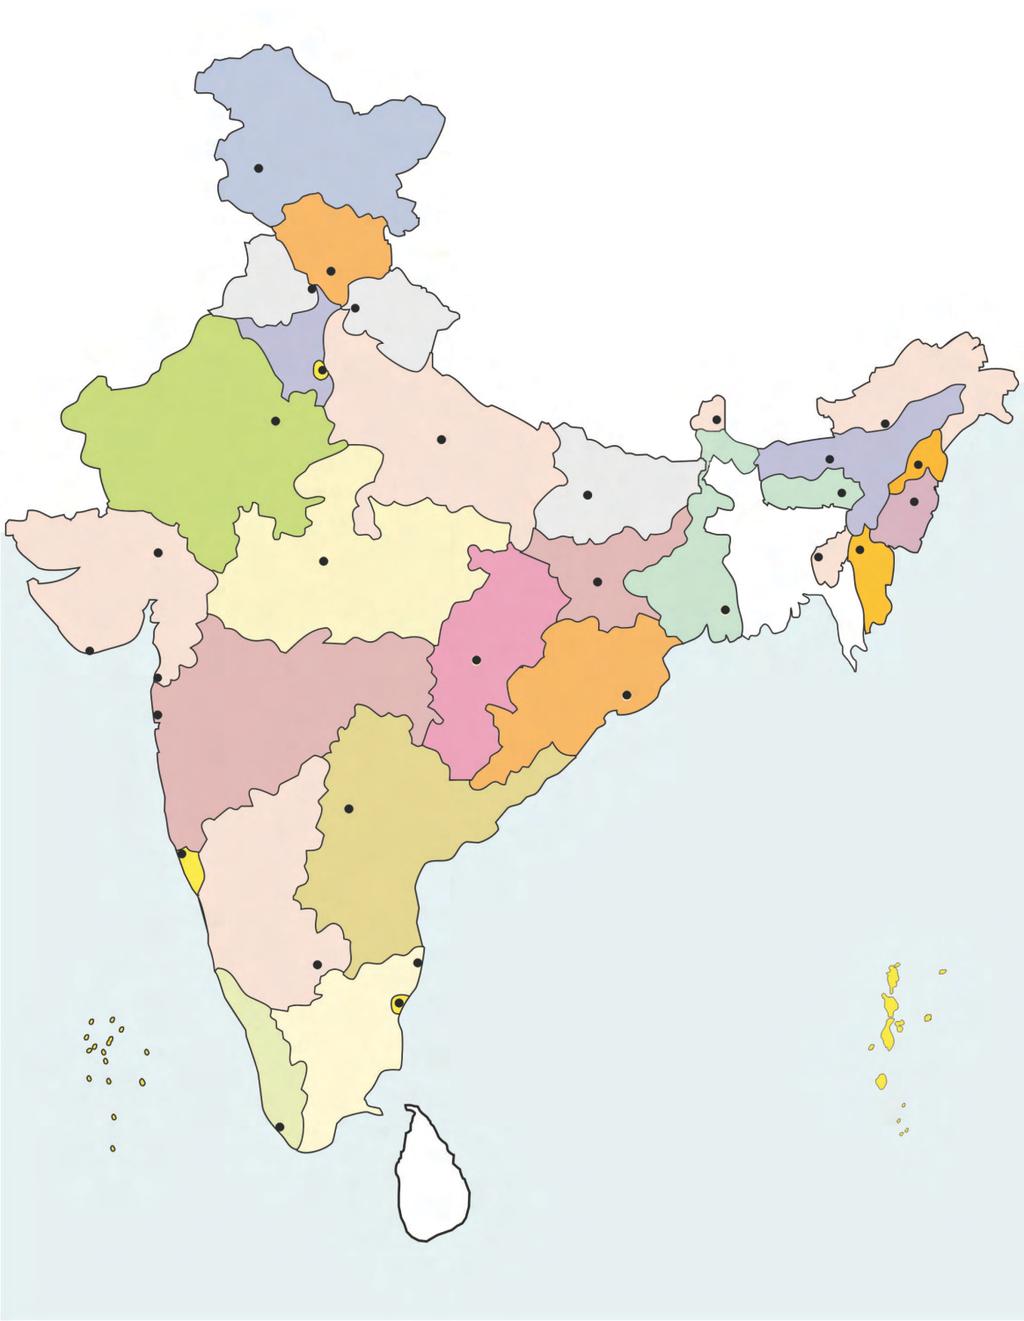 MY STATE Locate our state in the India map given and